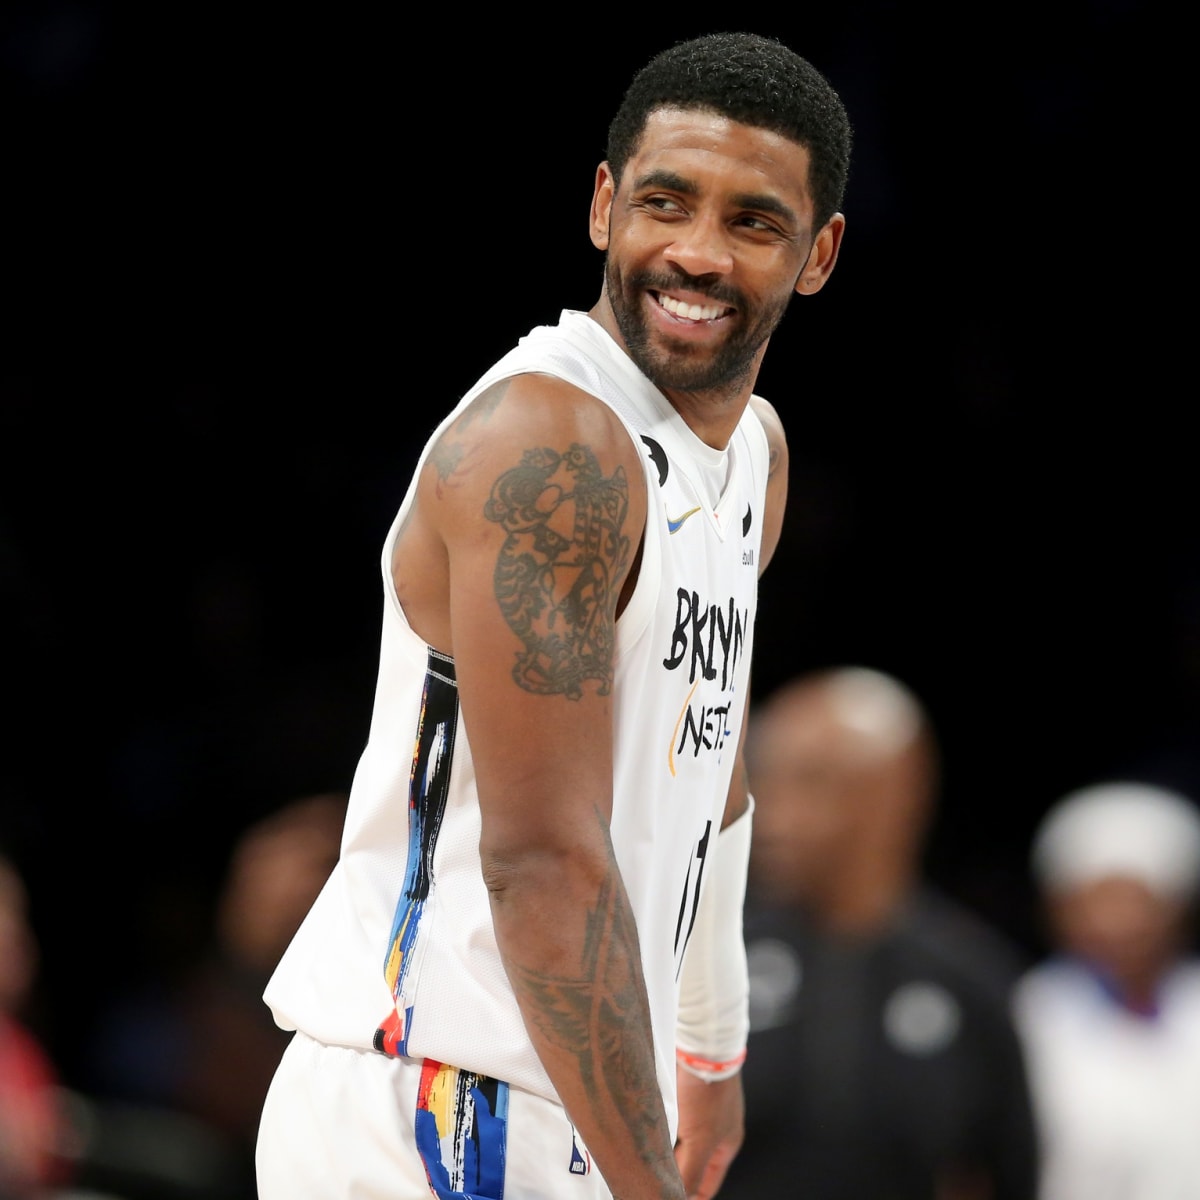 Miami made offer for Kyrie at deadline, Heat will look for new